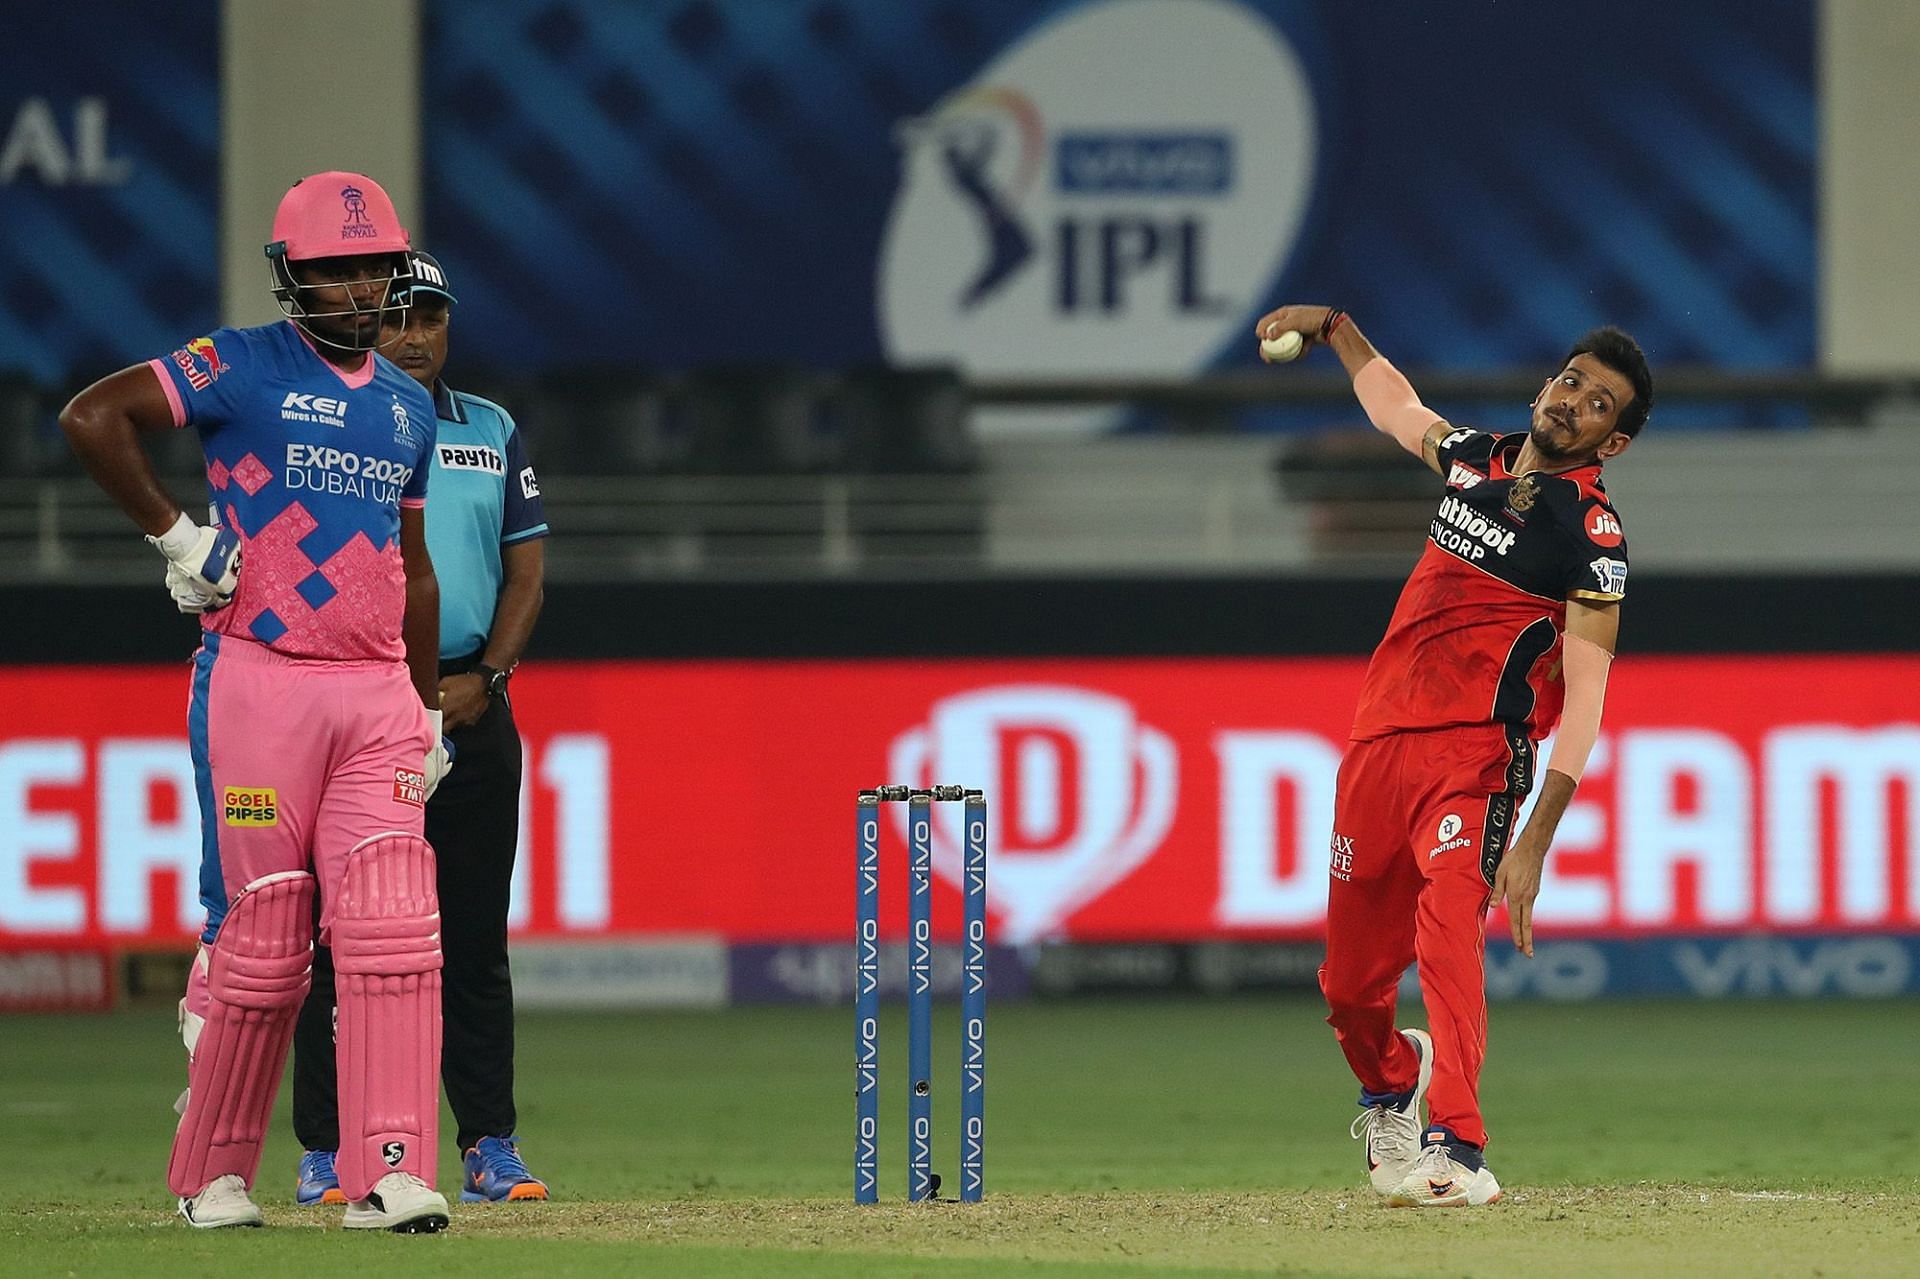 Yuzvendra Chahal has arguably been RCB&#039;s biggest match-winner in the years goneby. (Picture Credits: IPL).